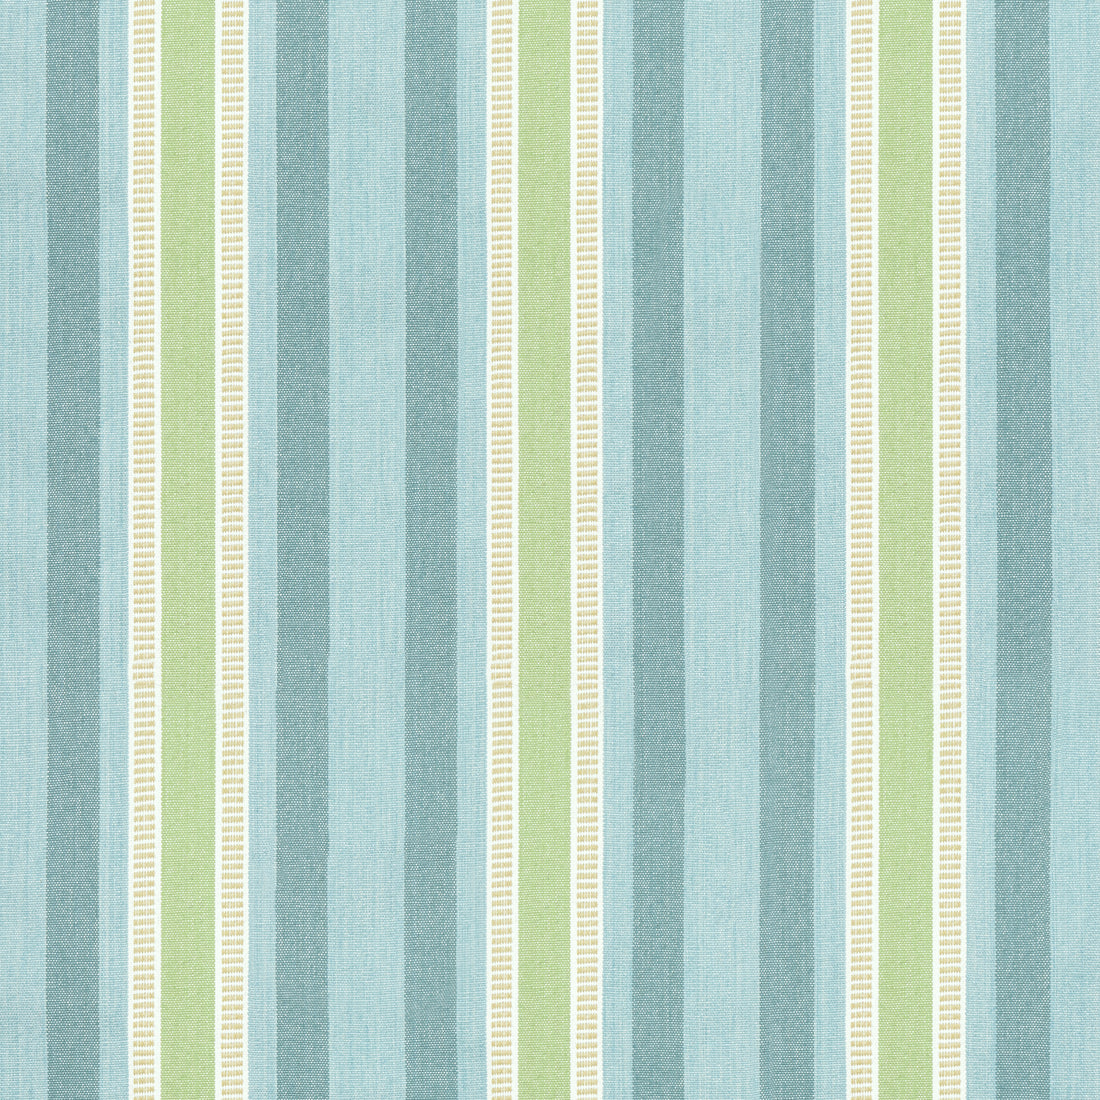 Dearden Stripe fabric in turquoise and green color - pattern number AW23152 - by Anna French in the Willow Tree collection